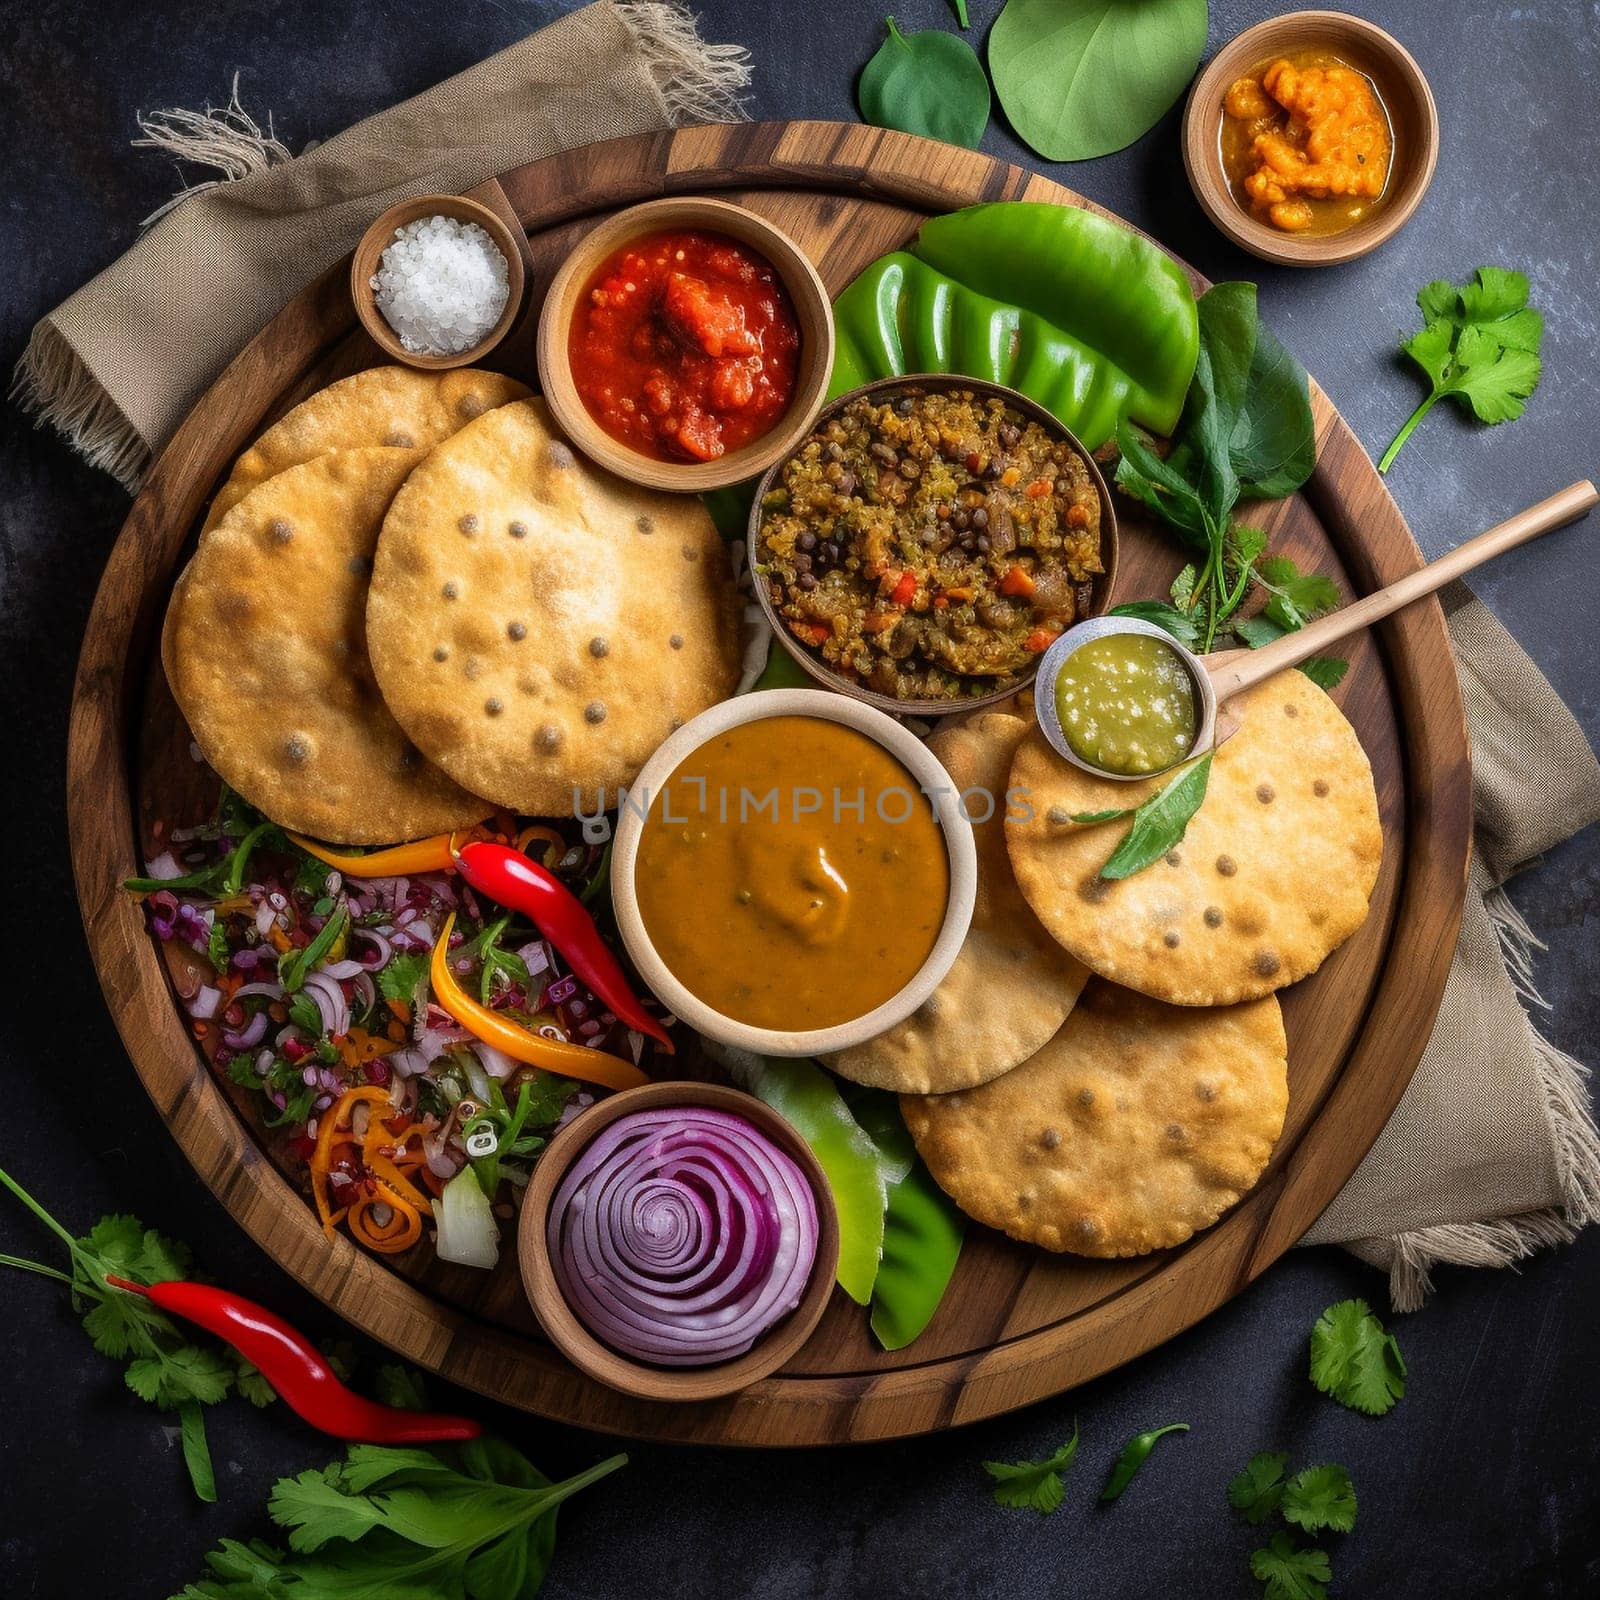 Experience the taste of Mauritius with a plate of freshly made Dholl Puri, a flatbread filled with spiced lentils and served with chutney. This top-down image showcases the variety of colorful ingredients and their vivid colors, arranged around the main dish which is served on a traditional Mauritian plate or mat, evoking a sense of authenticity and cultural significance. Smaller bowls containing chutney, pickles, and other condiments commonly used in Mauritian cuisine add to the visual appeal of the scene. Utilizing natural, indirect daylight streaming in from one side, the lighting illuminates the dish and casts soft shadows that accentuate the textures and colors of the ingredients. The image conveys a sense of warmth, comfort, and tradition, inviting the viewer to enjoy a simple and satisfying meal. Emphasize the fluffy and slightly chewy texture of the Dholl Puri, as well as the flavors and aromas of the spiced lentil filling. Traditional Mauritian ingredients such as cumin, coriander, and ginger add more visual interest and showcase the unique flavors of the dish.